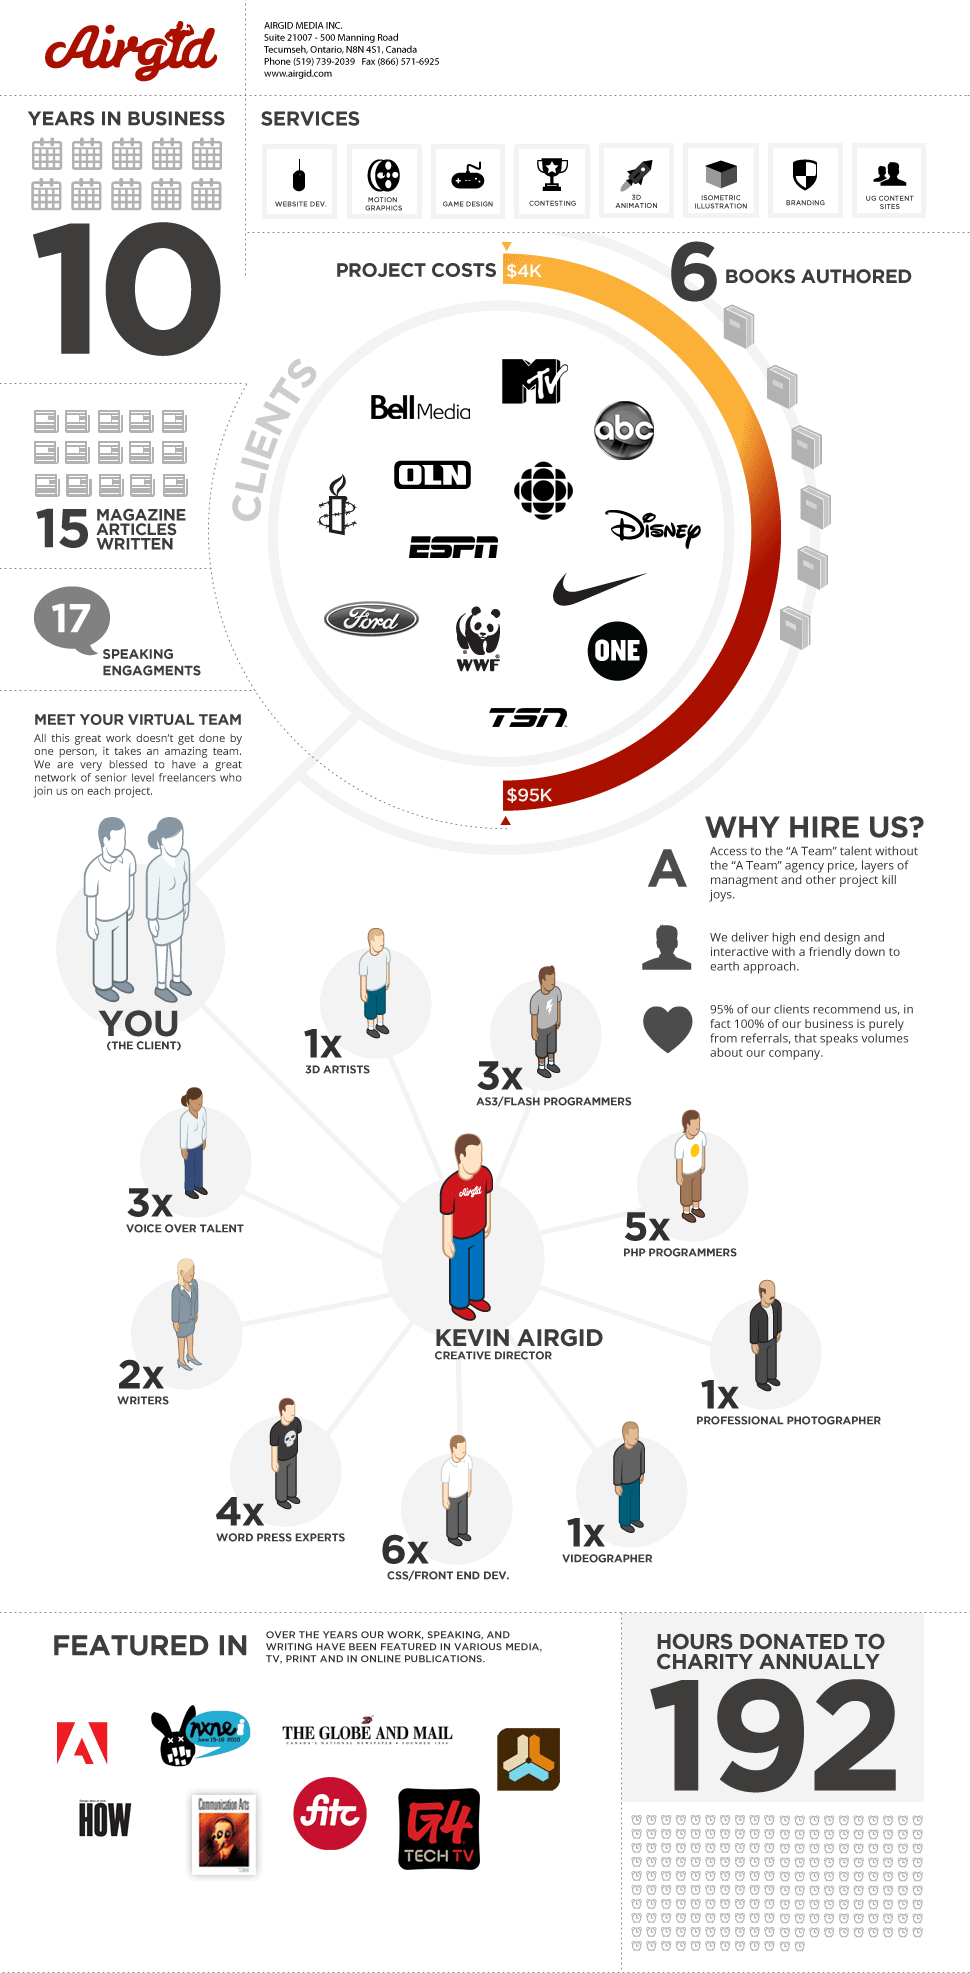 About Airgid Media Inc. Infographic